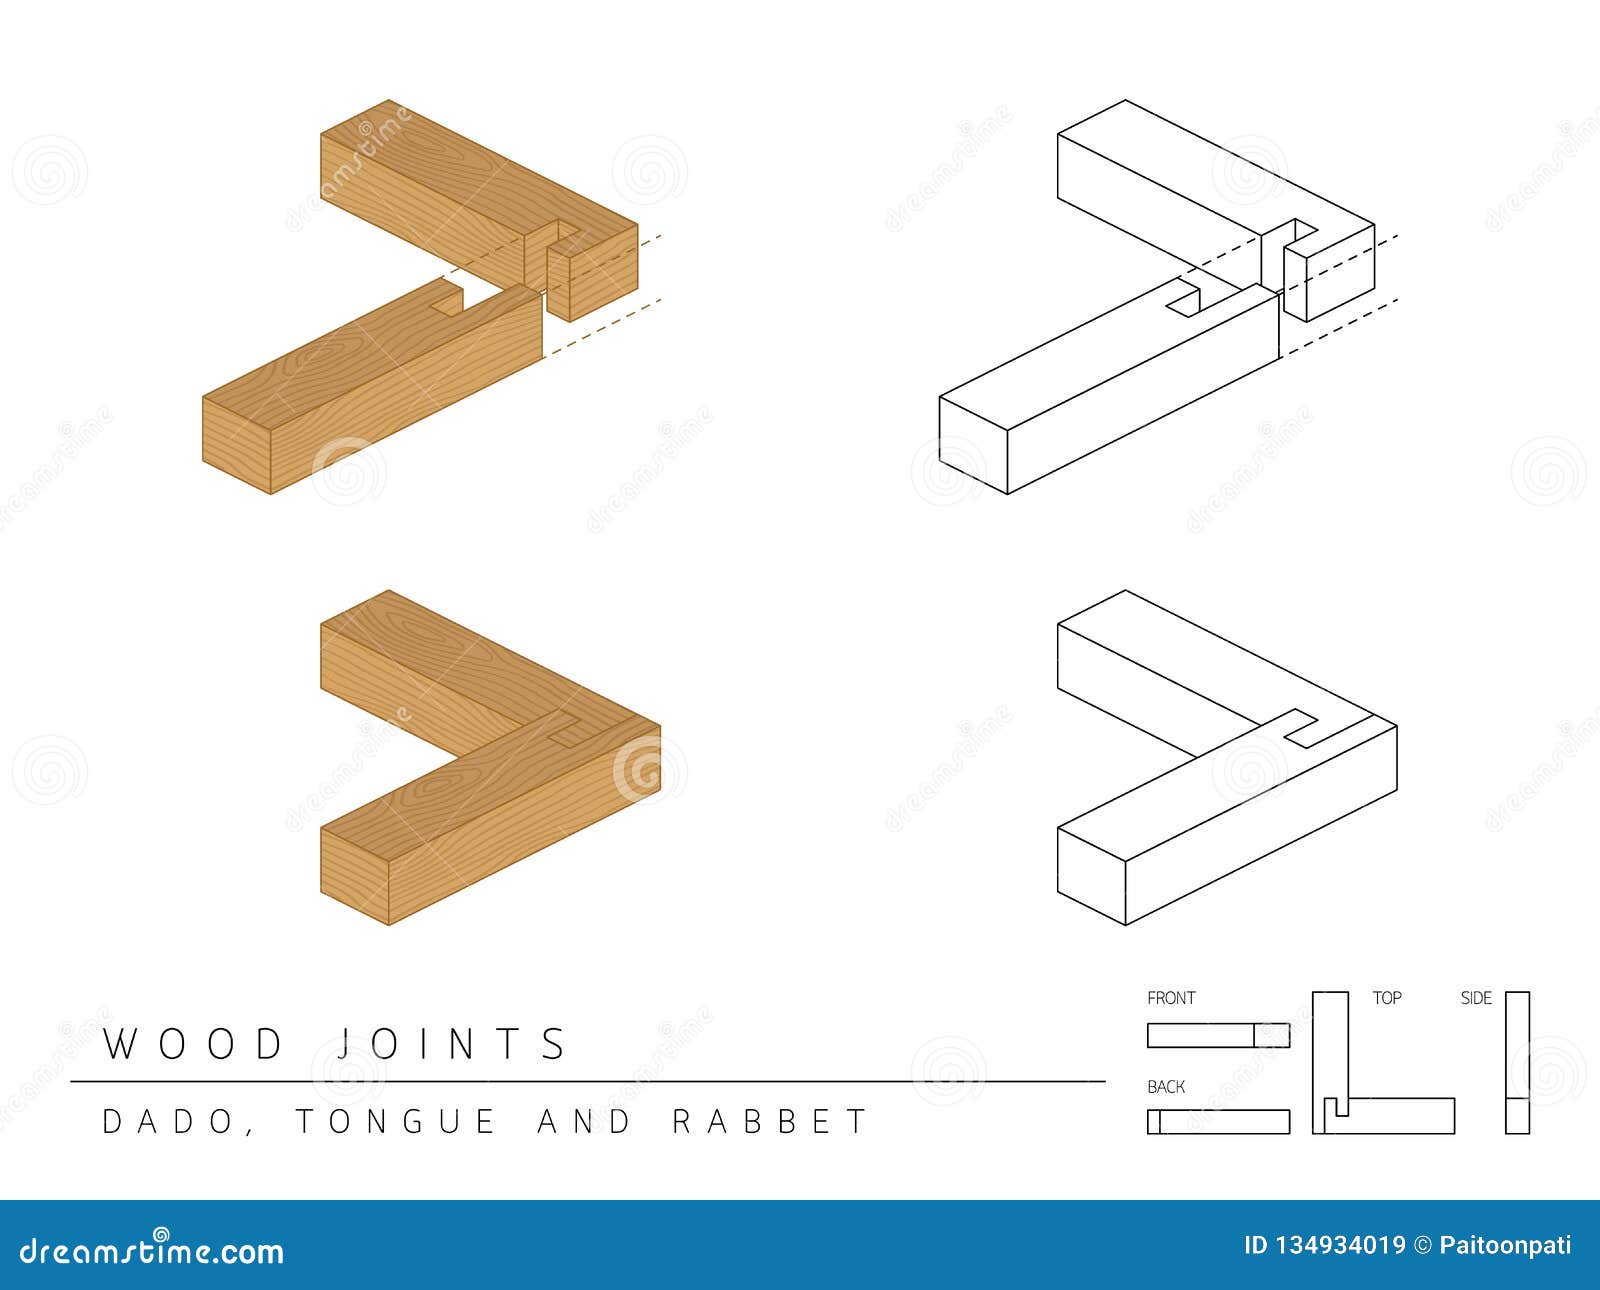 type of wood joint set dado, tongue and rabbet style, perspective 3d with top front side and back view  on white